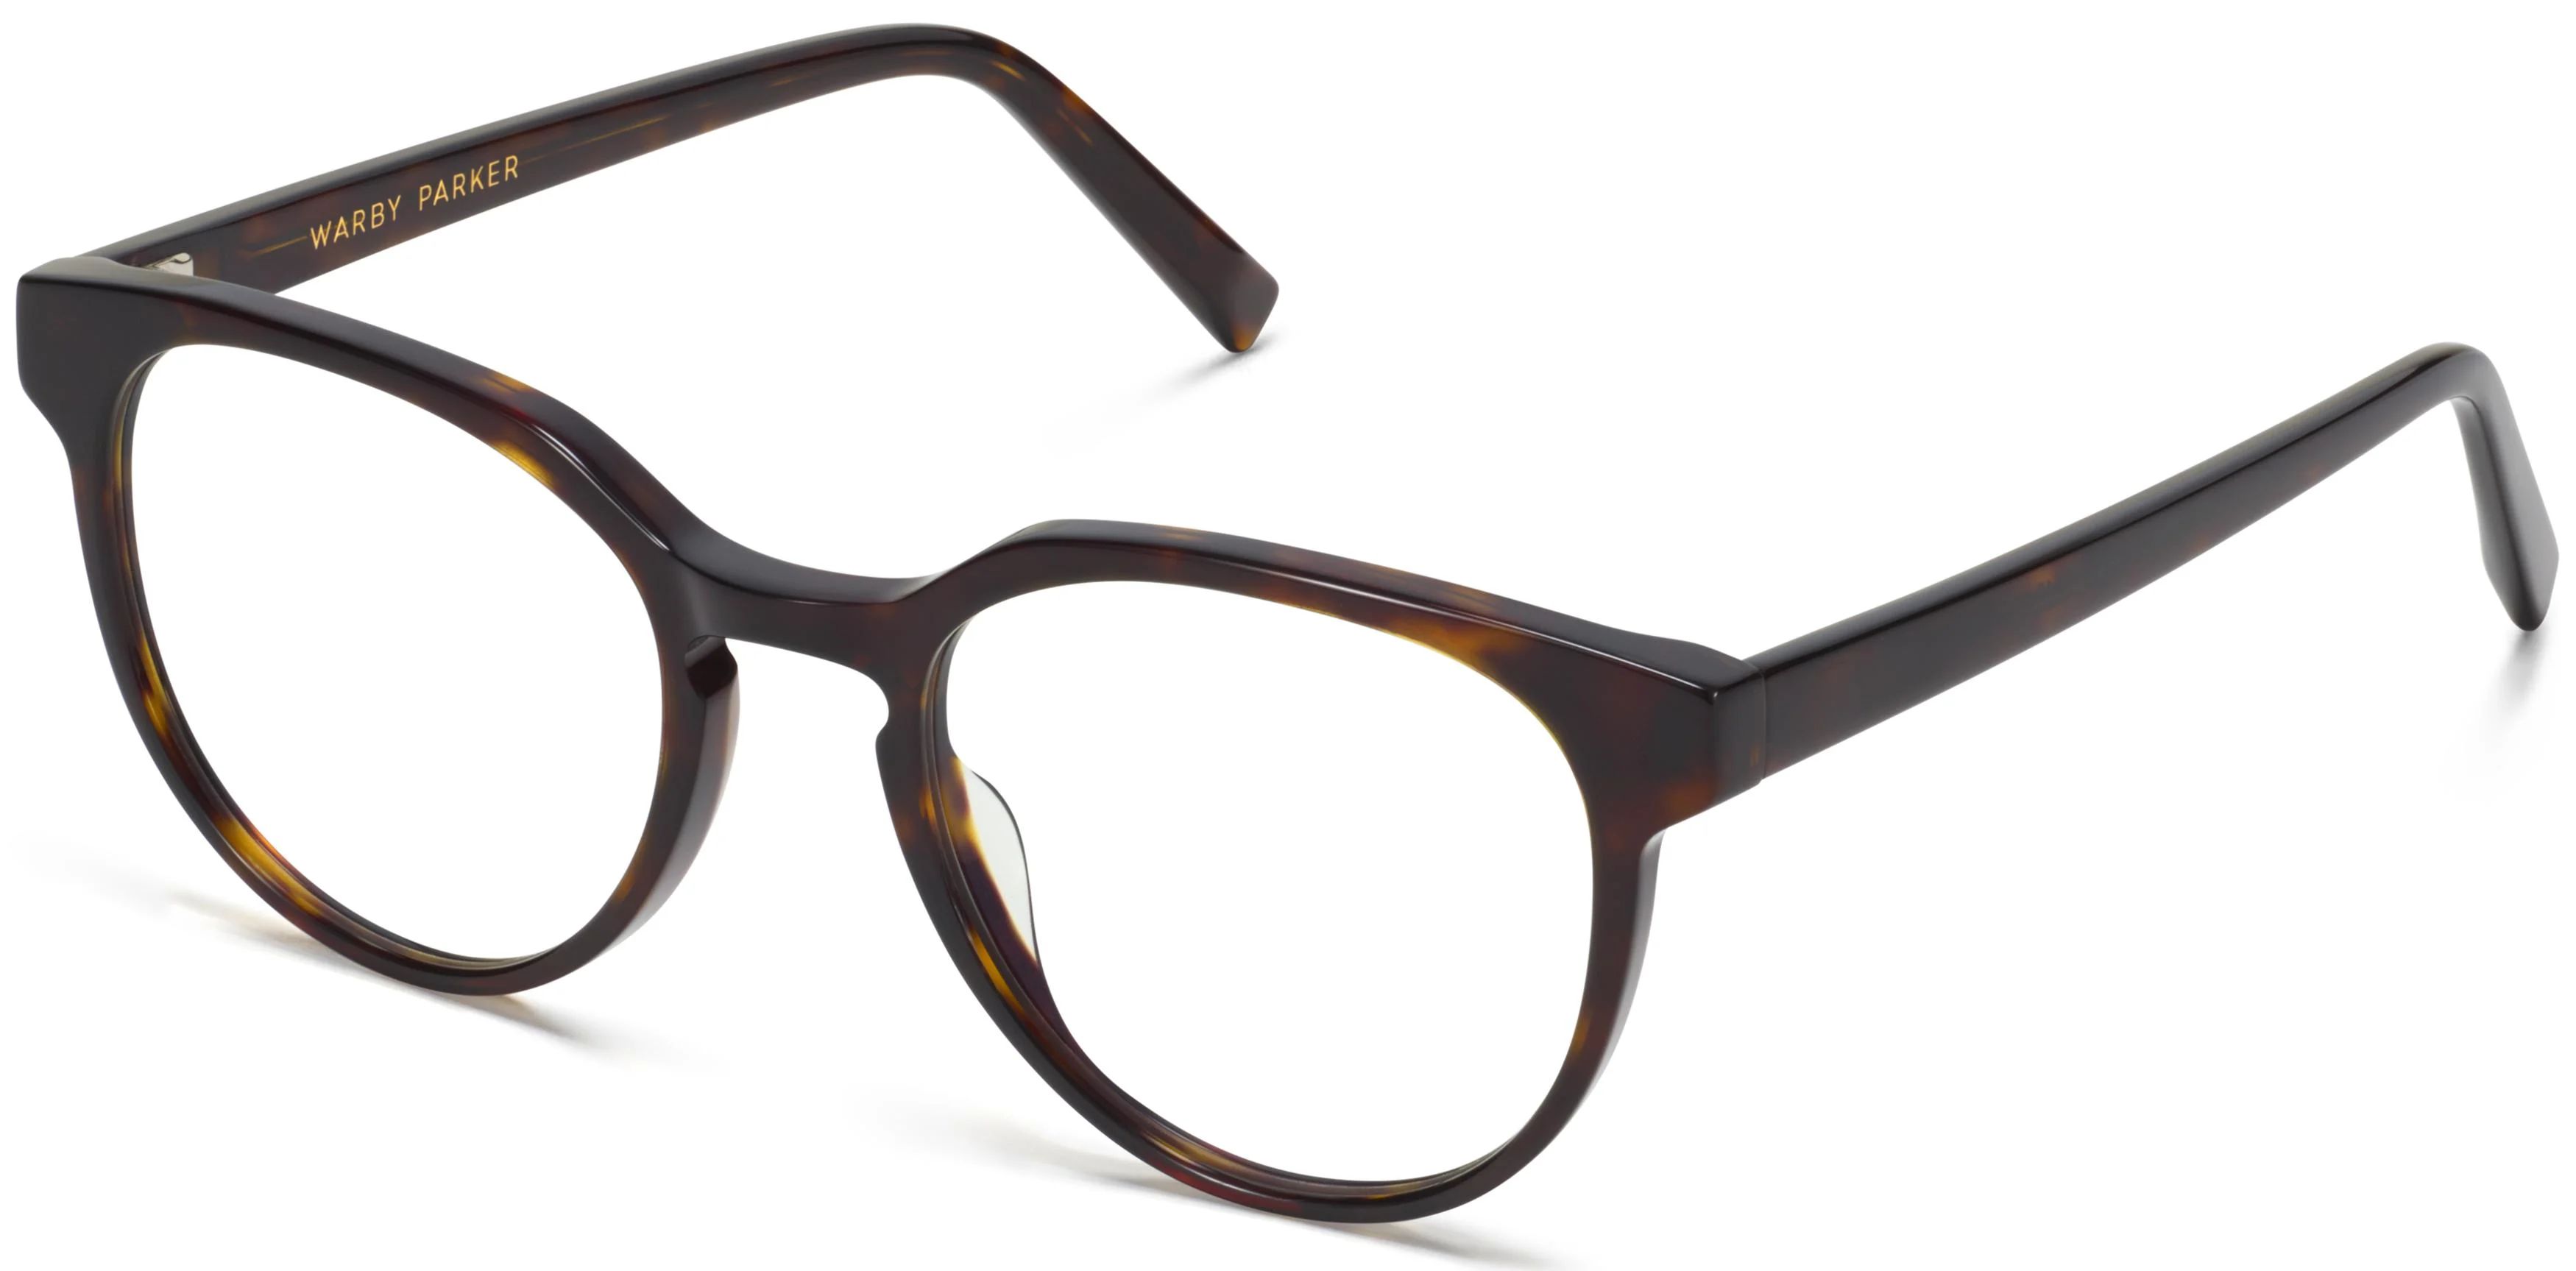 Wright | Warby Parker (US)